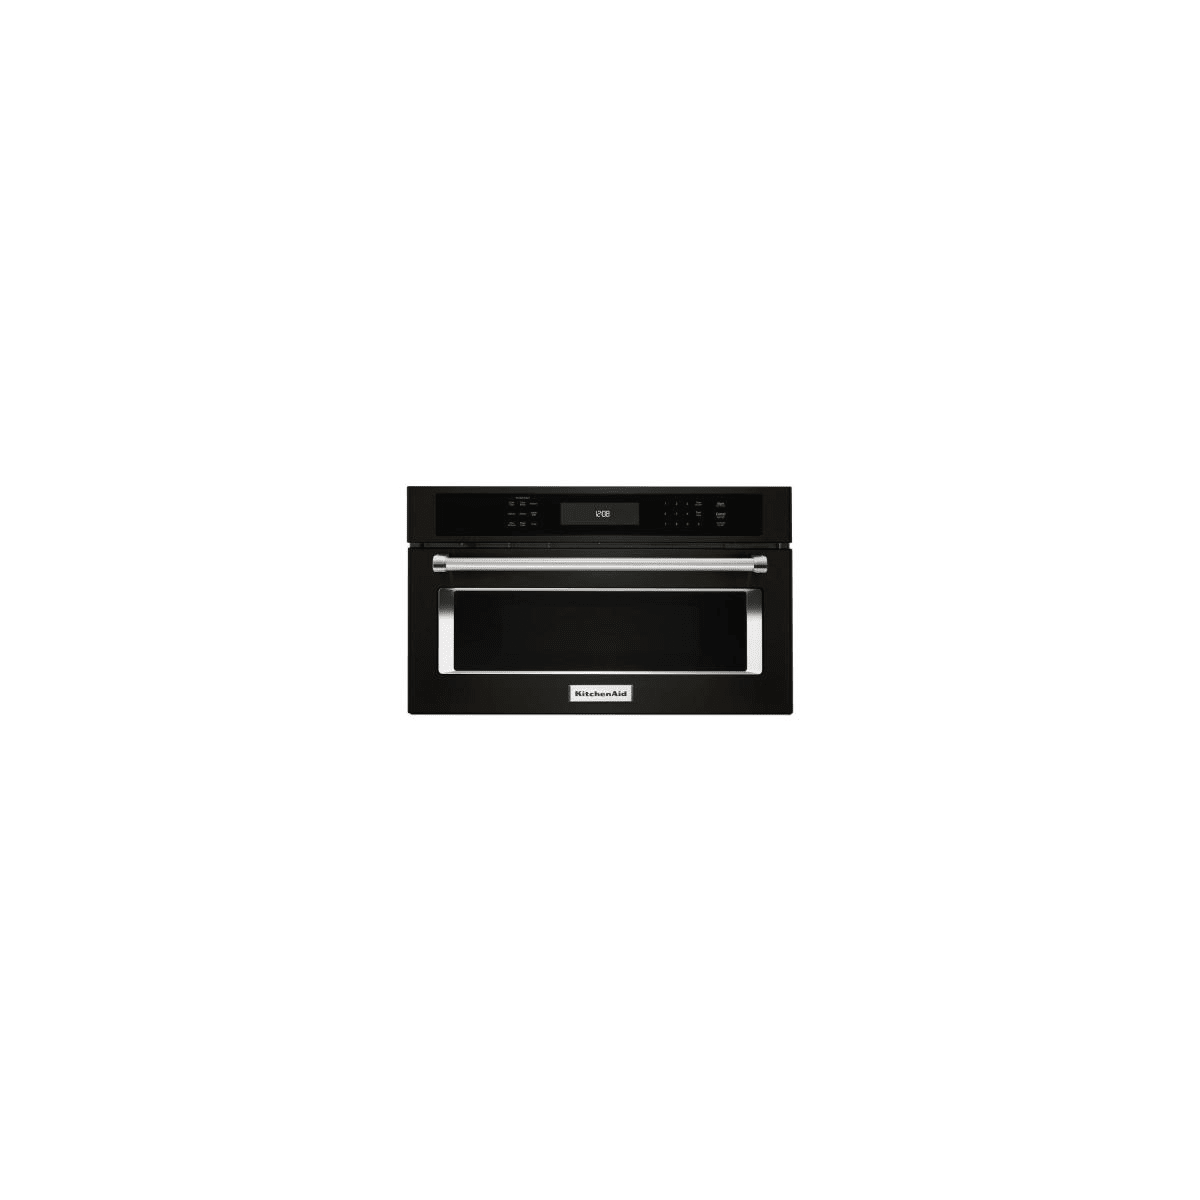 KitchenAid KMBP100ESS 30 Inch Built-in Microwave Oven with 1.4 Cu